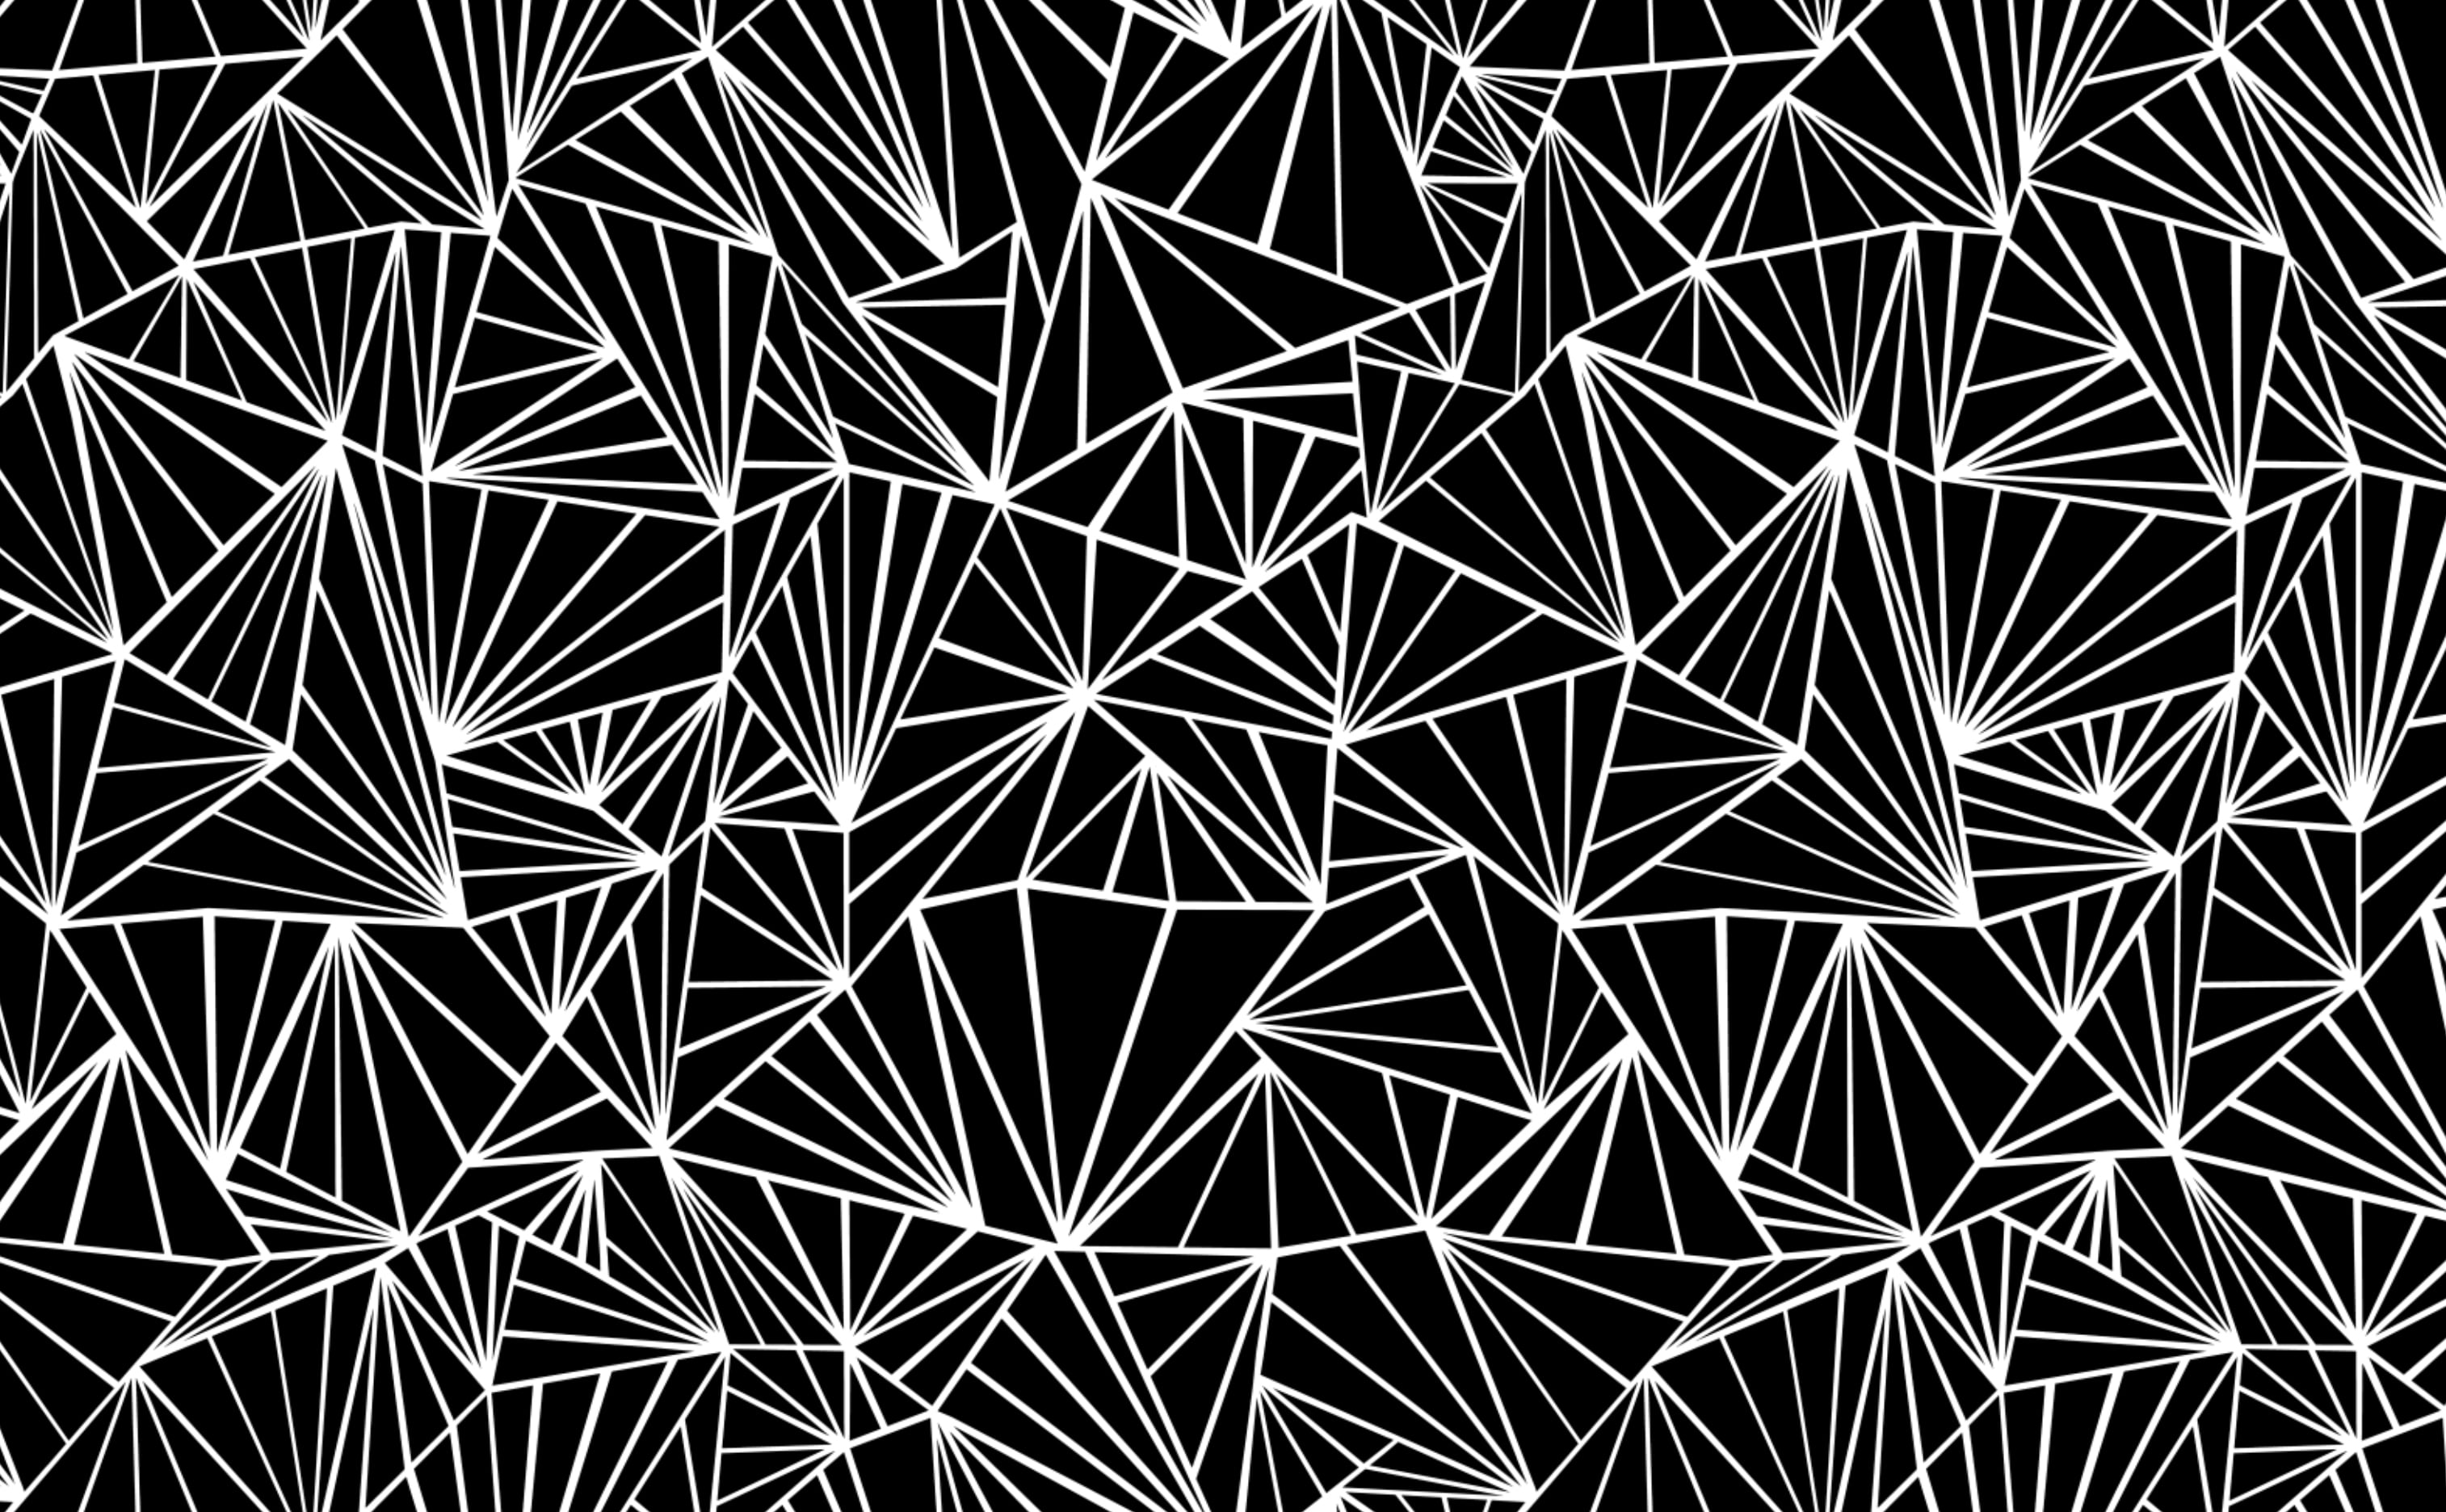 A black and white abstract pattern - Pattern